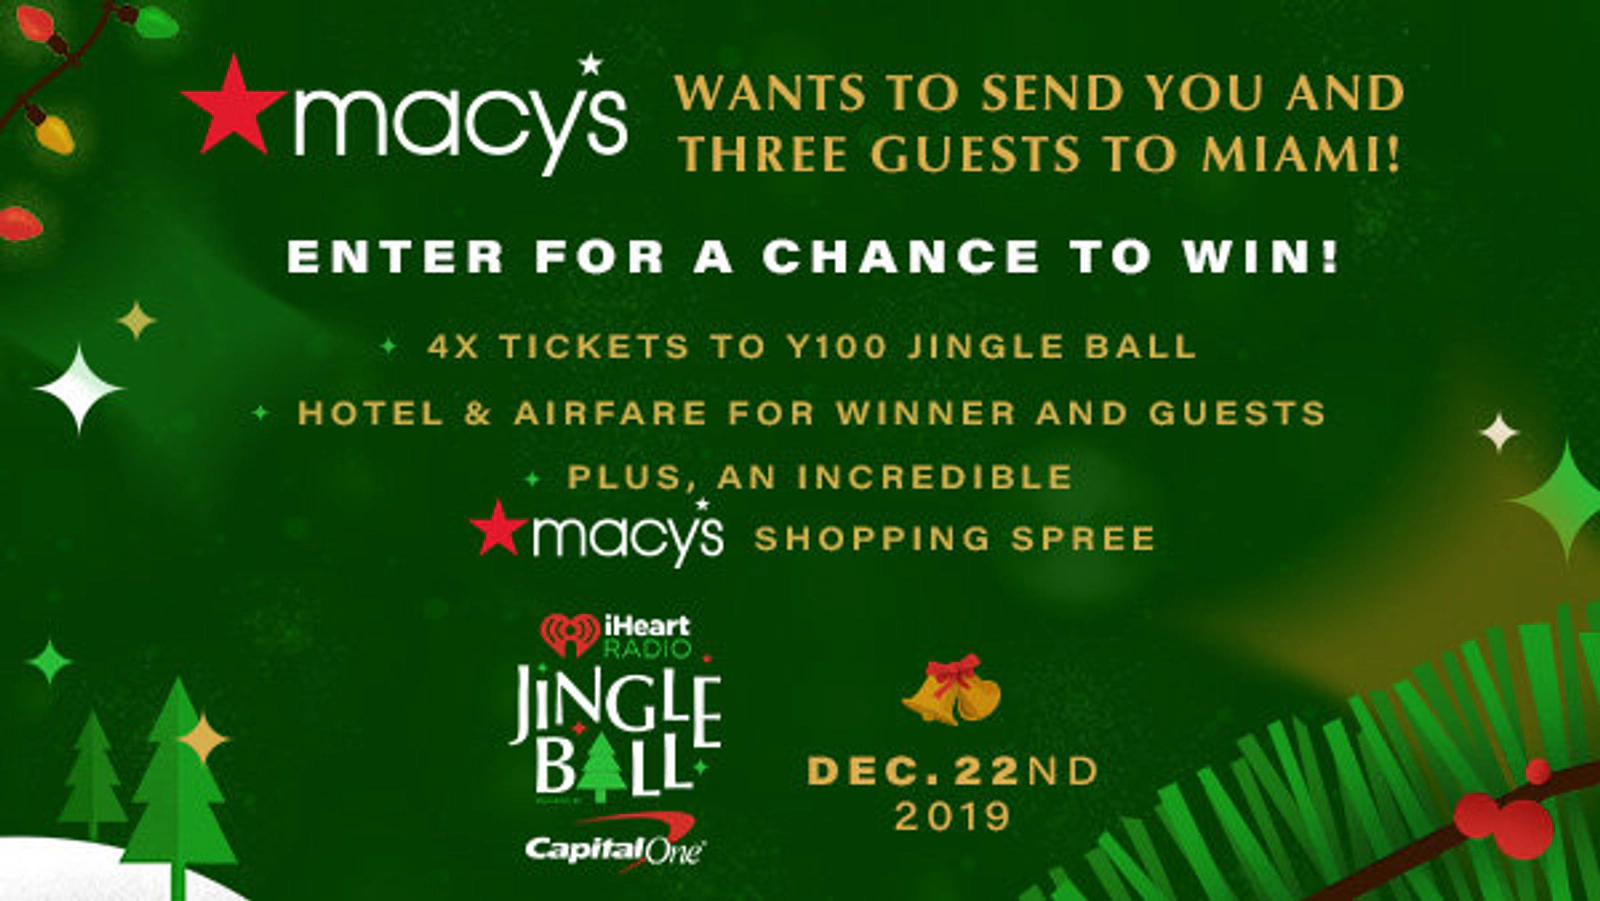 Macy's Wants To Send You And Three Guests To Miami! - Thumbnail Image